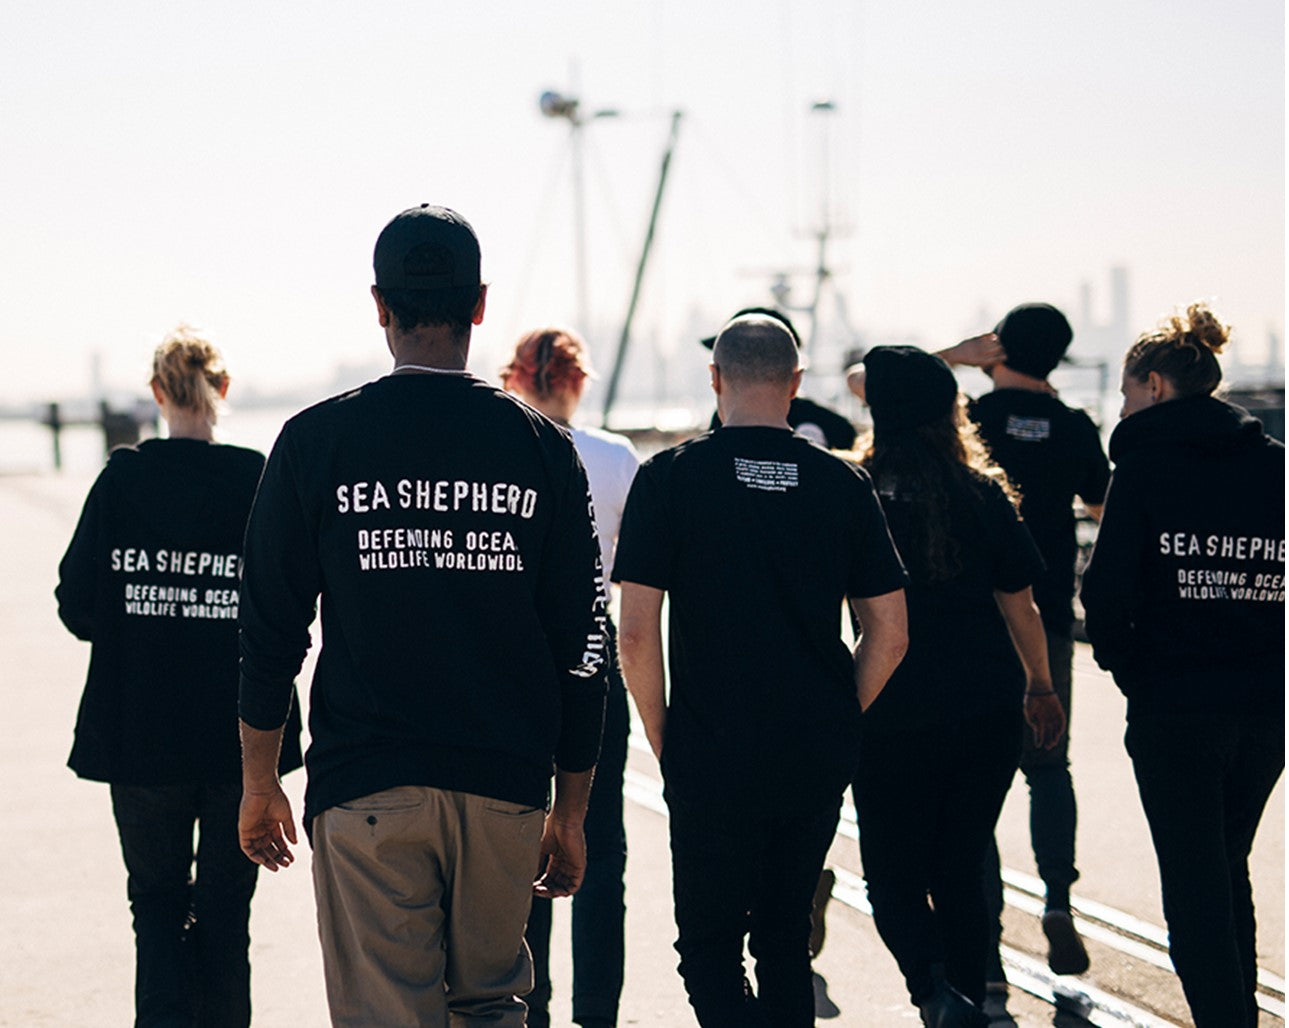 Stand Fast by Sea Shepherd